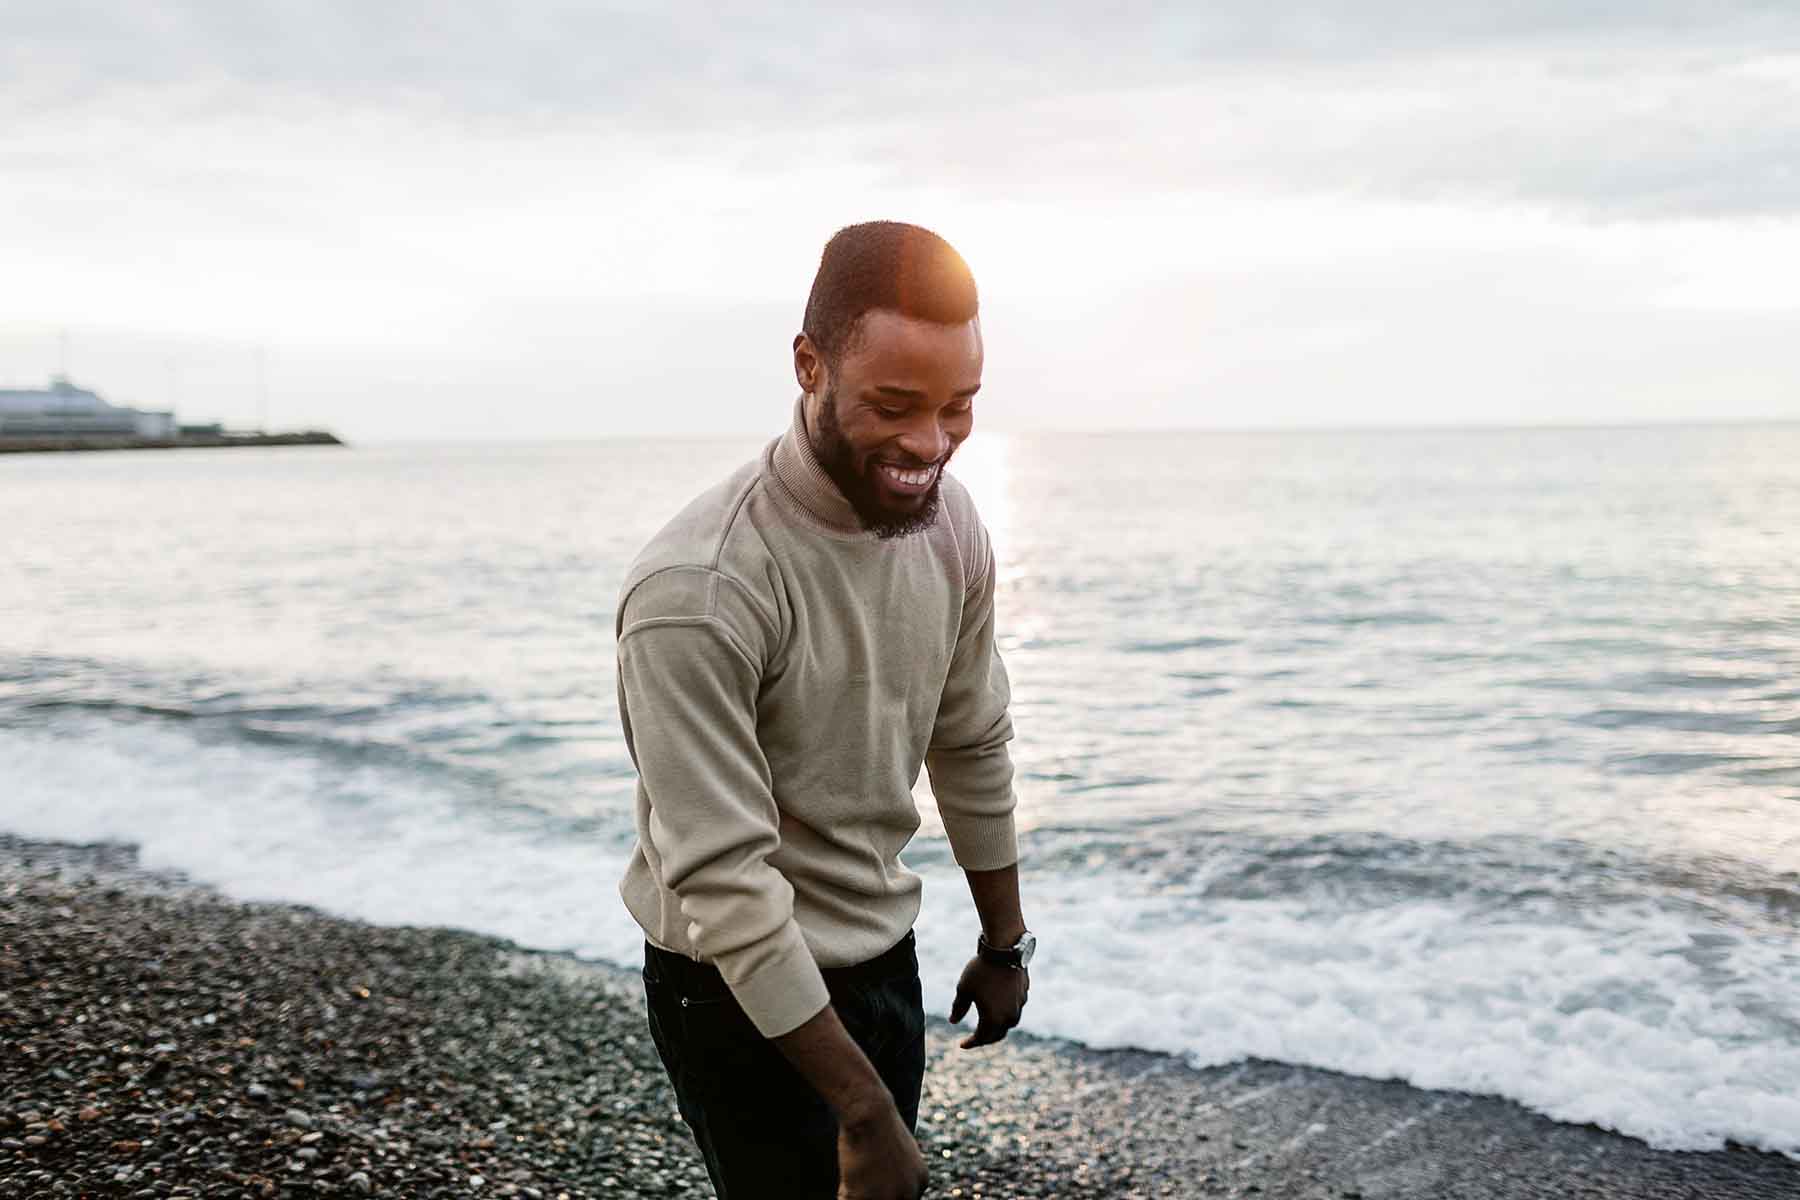 Man walking along the beach shore, smiling and looking thoughtful.